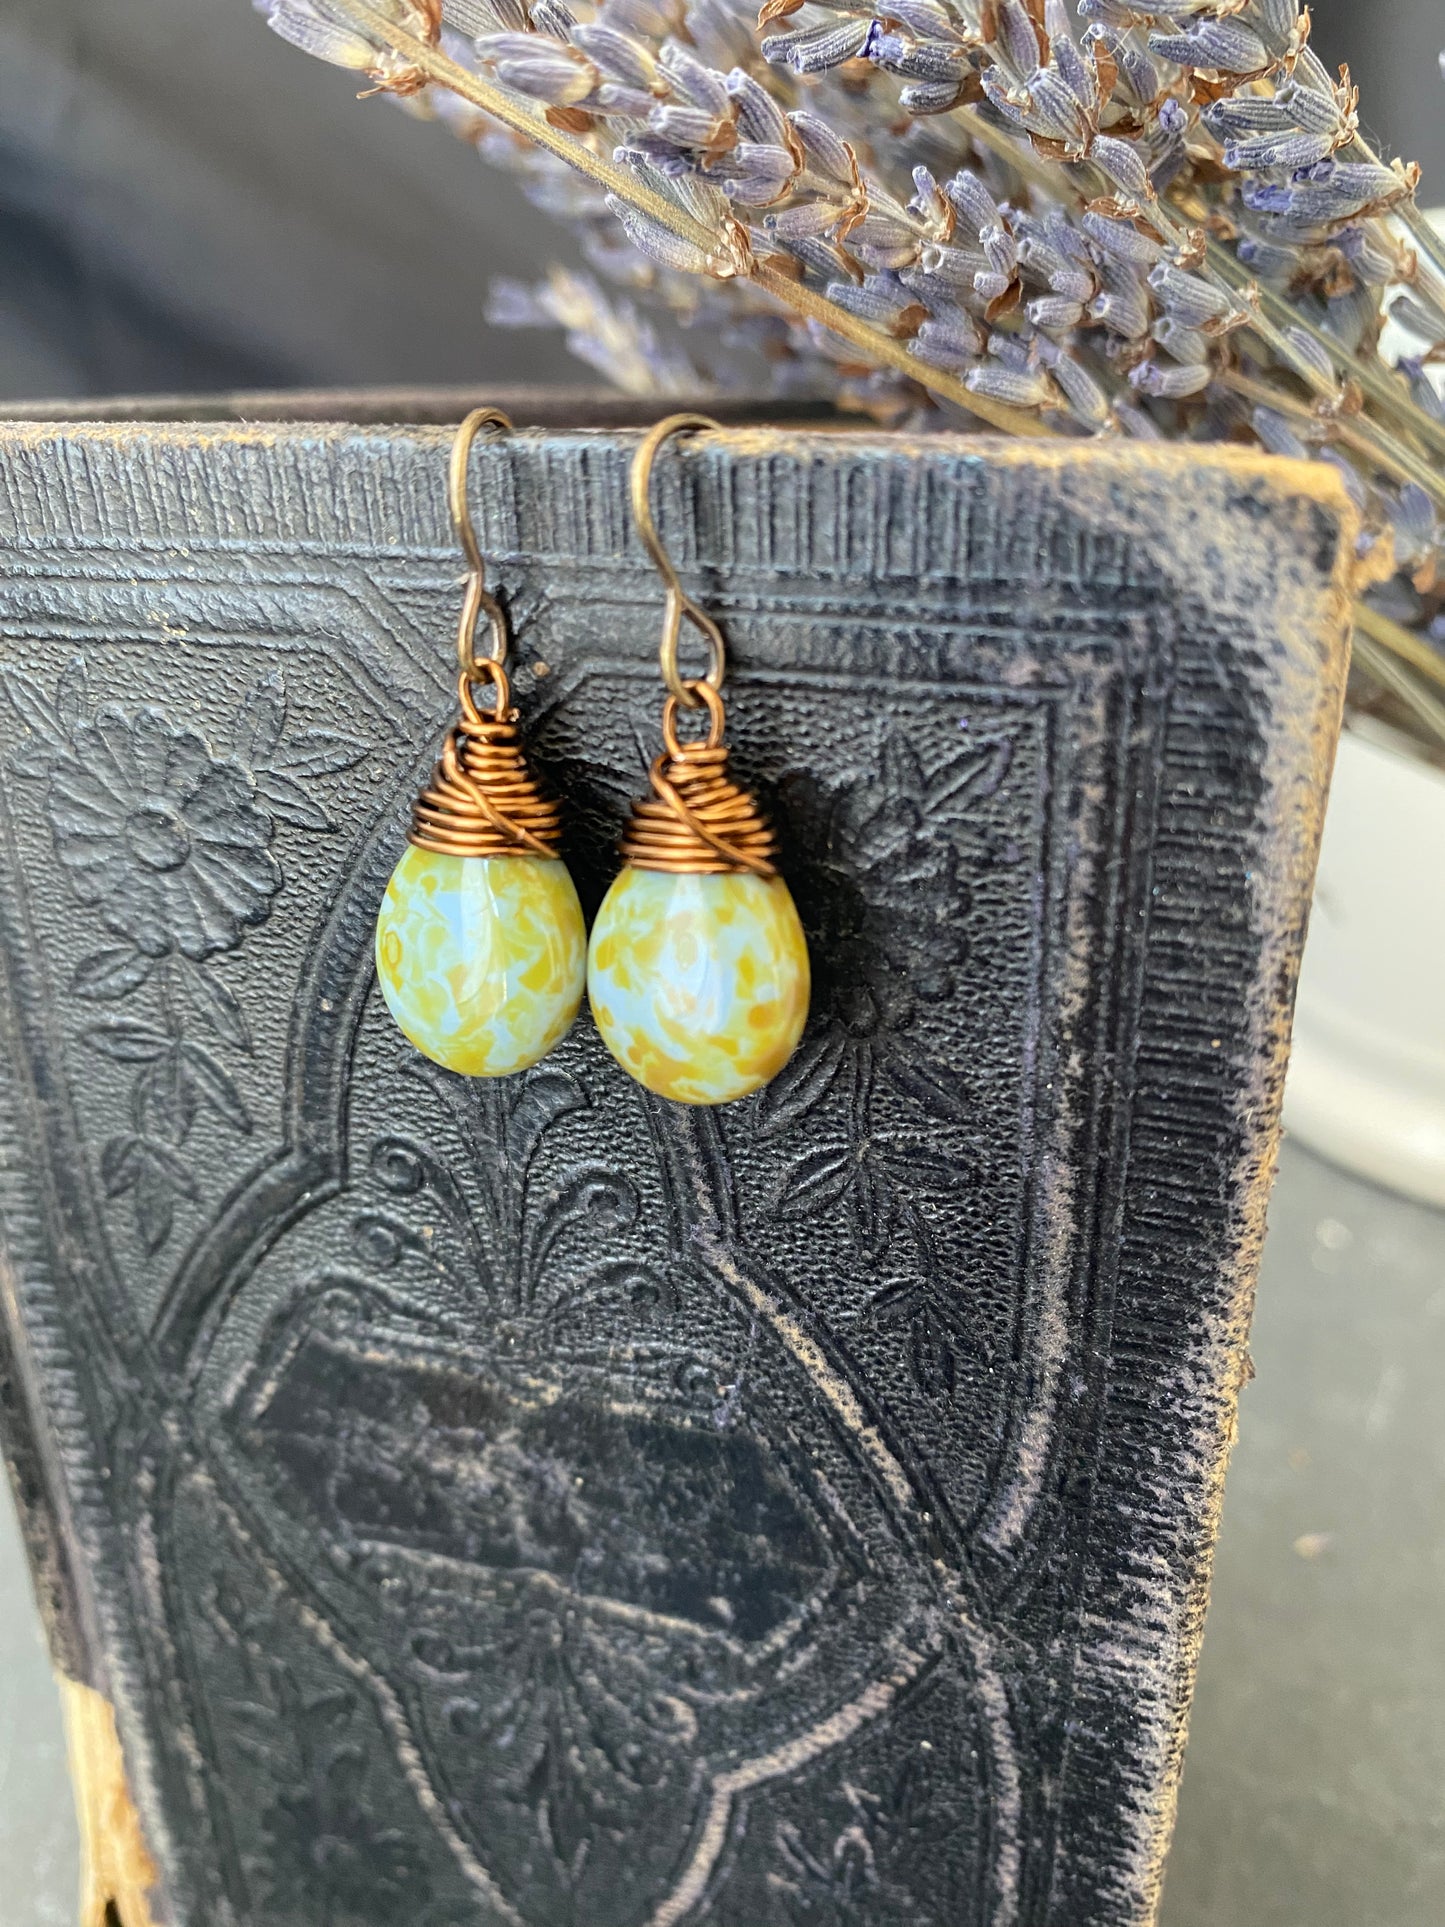 Teardrop glass in blue and green and bronze wire wrapped earrings.